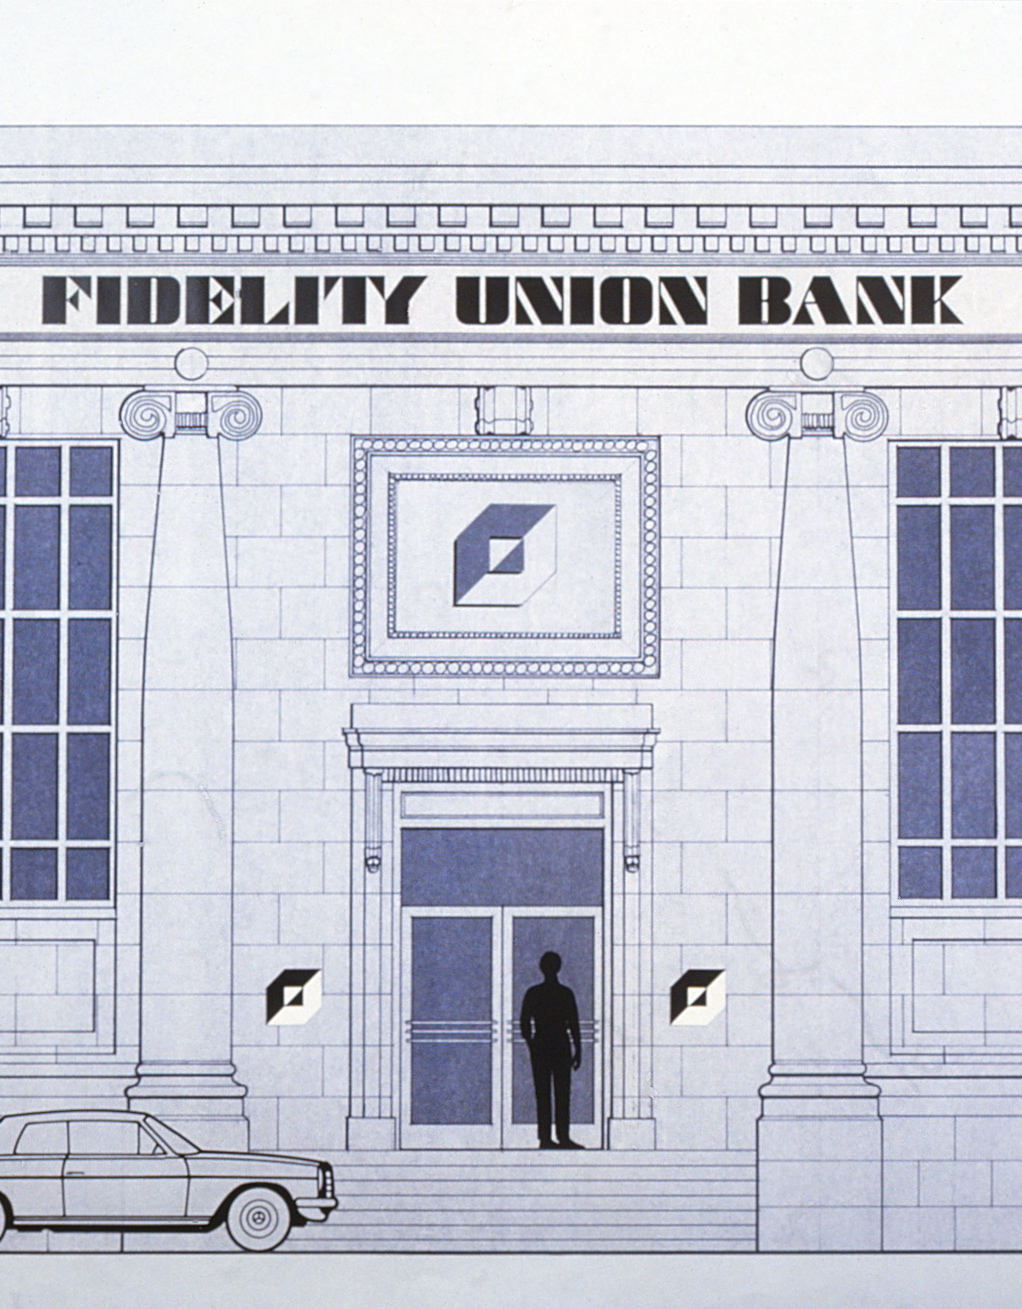 Closeup drawing of how the logo and typeface would look on the bank branch building.